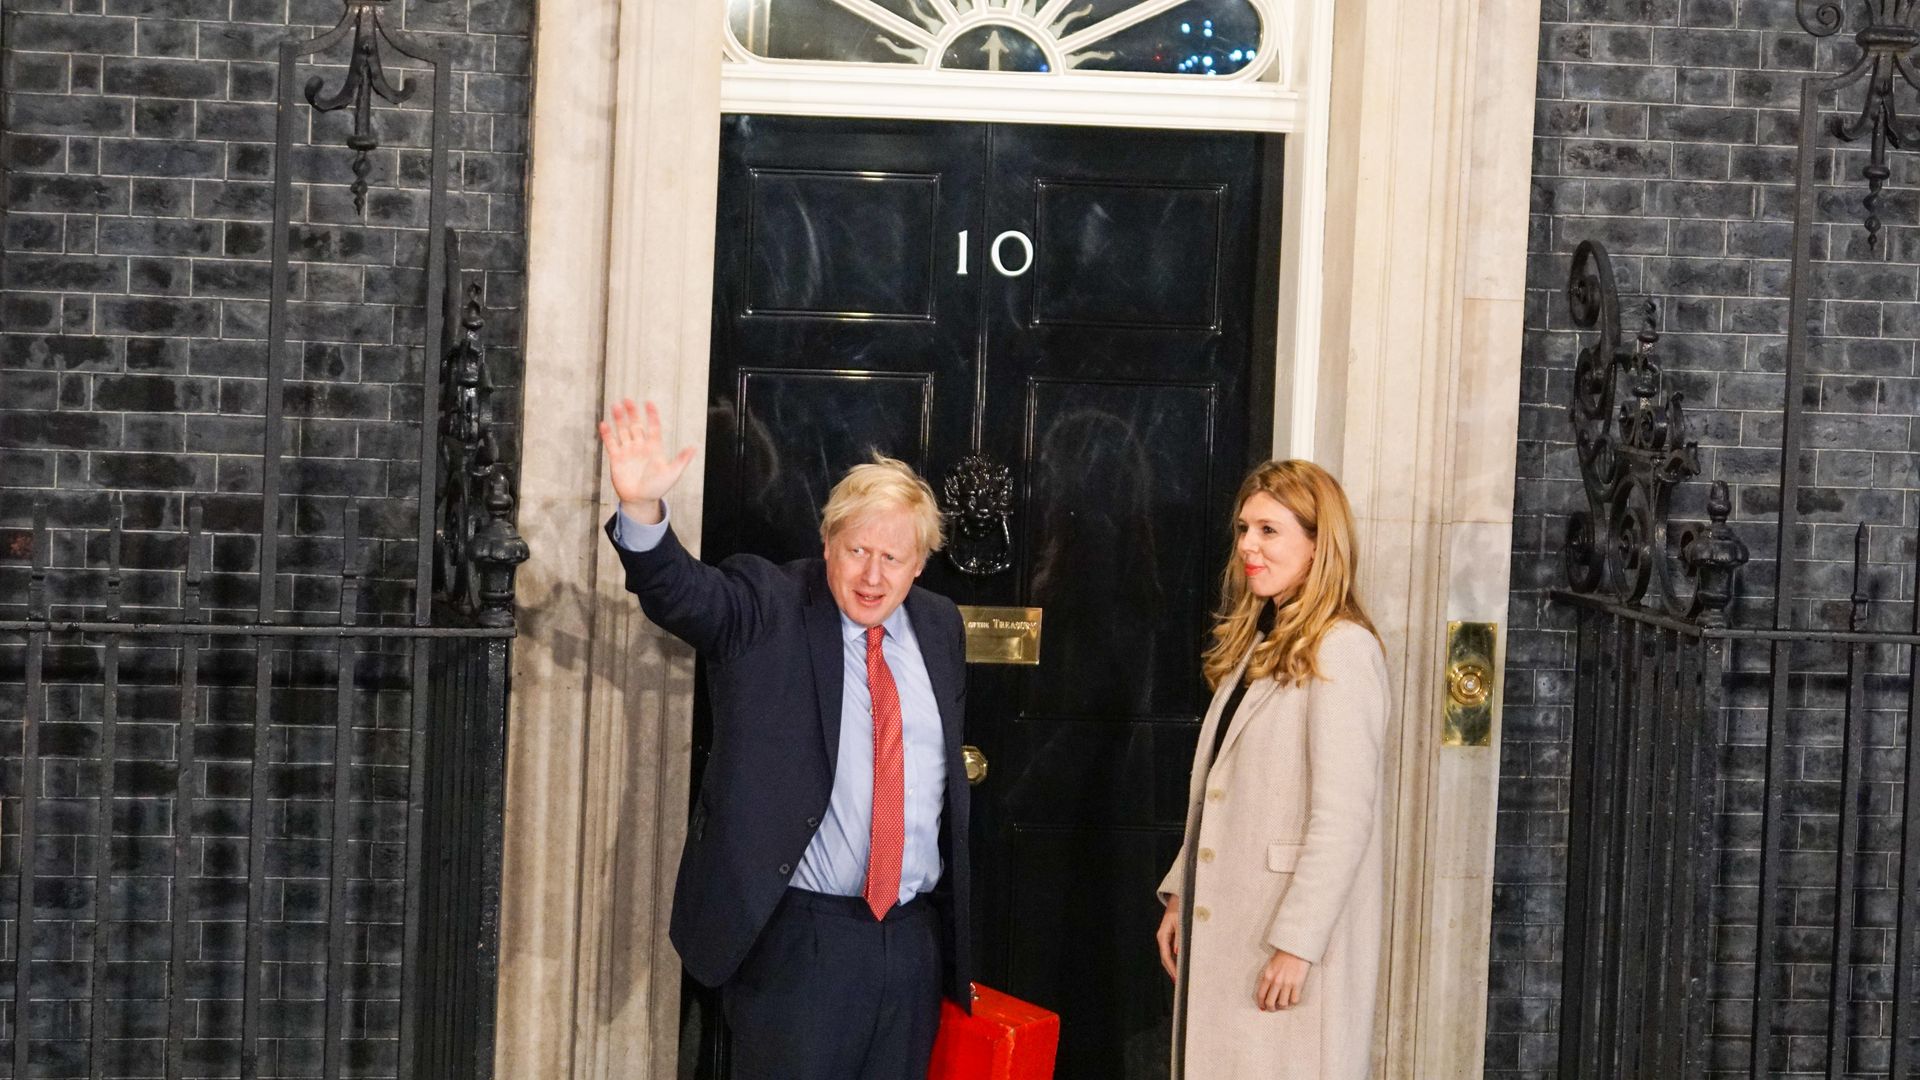 Prime Minister Boris Johnson and his partner Carrie Symonds enter Downing Street as the Conservatives celebrate a sweeping election victory on December 13, 2019 in London